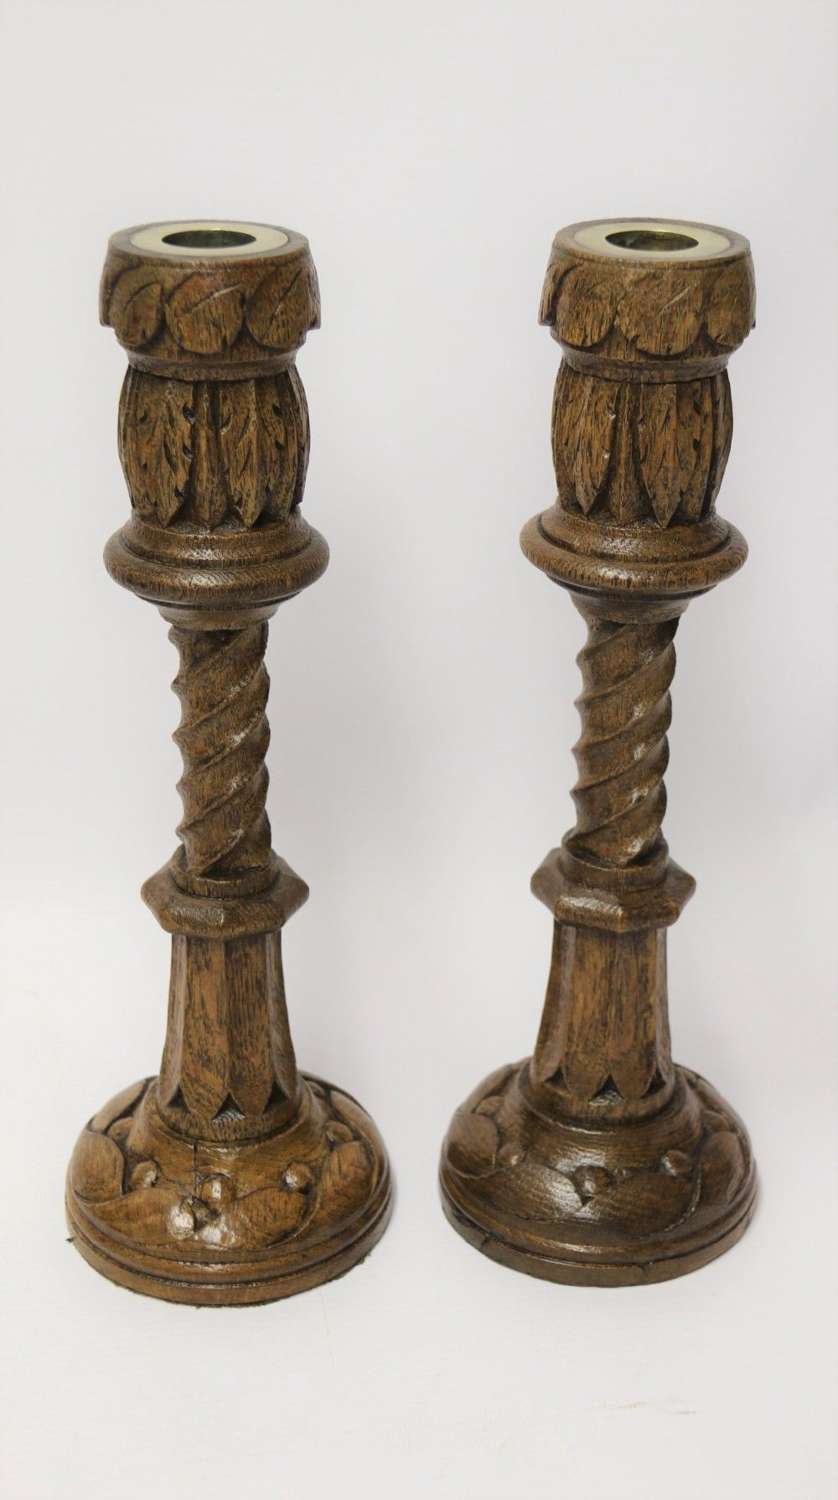 A Fine Pair Of English Victorian Carved Oak Gothic Revival Candlesticks.